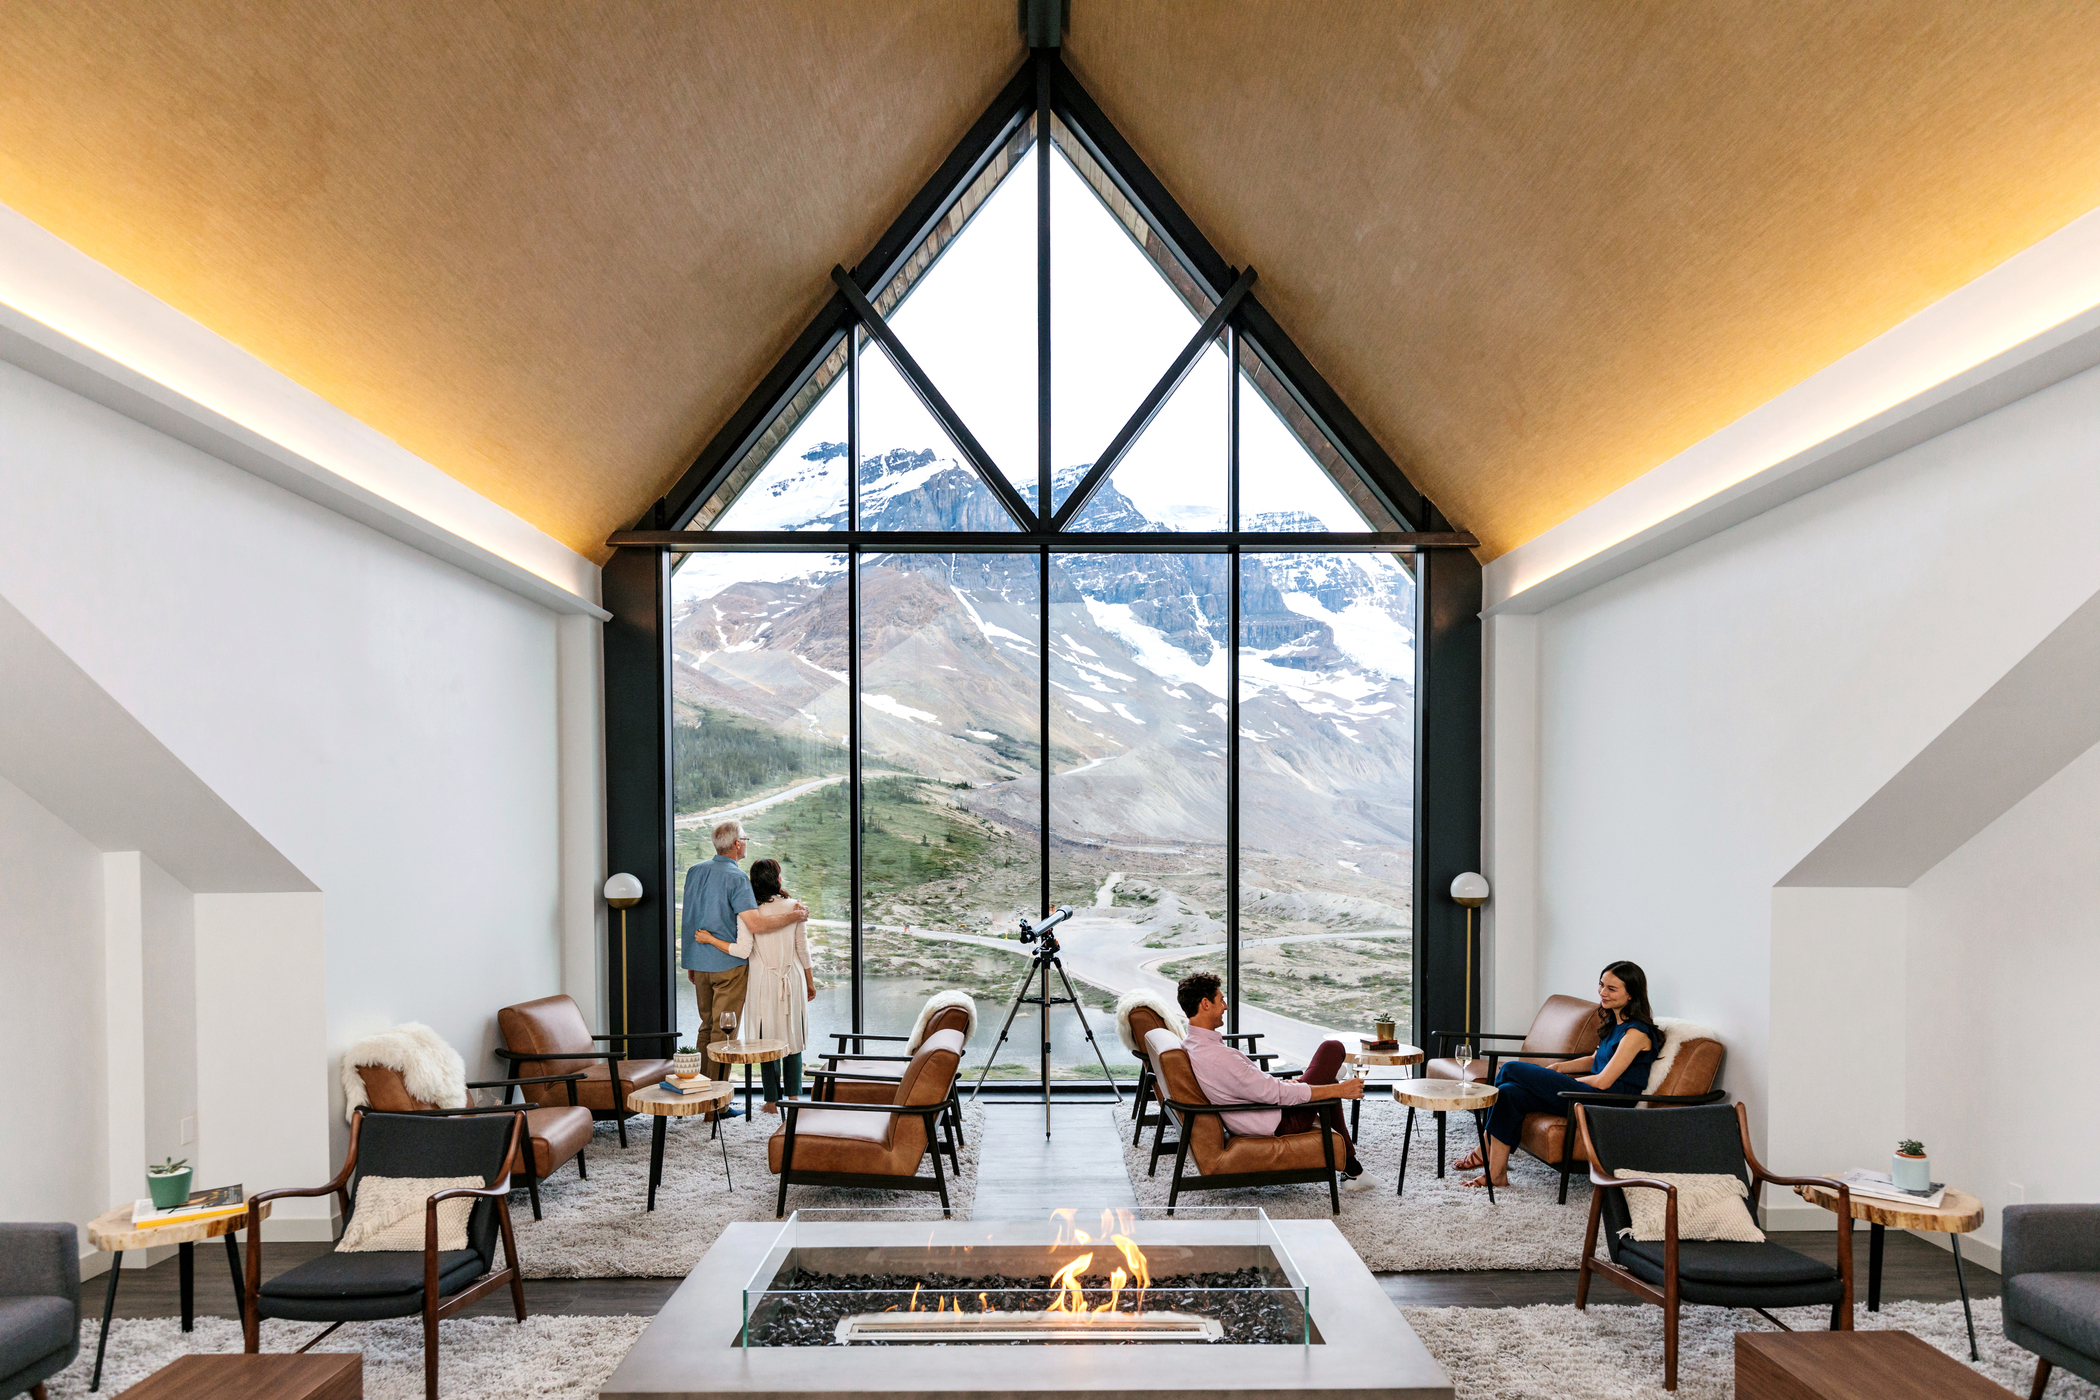 <Summer Limited> 4-Day Filmic Rockies Tour, staying in Glacier View Lodge, explore Banff, Yoho National Park and Columbia Icefield, Calgary/ Banff borading